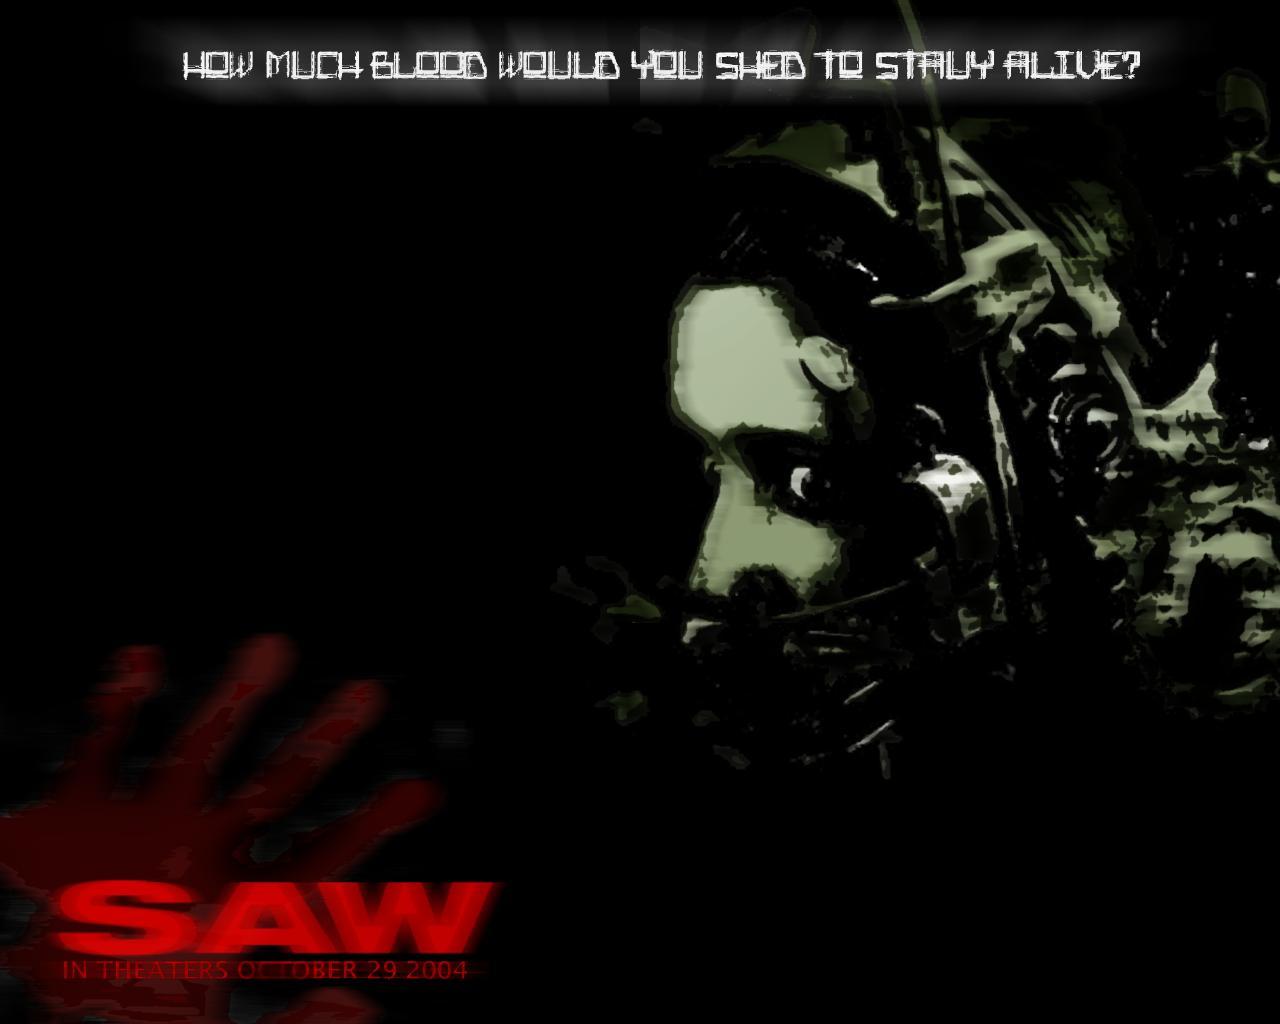 Gallery For > Saw 1 Wallpaper